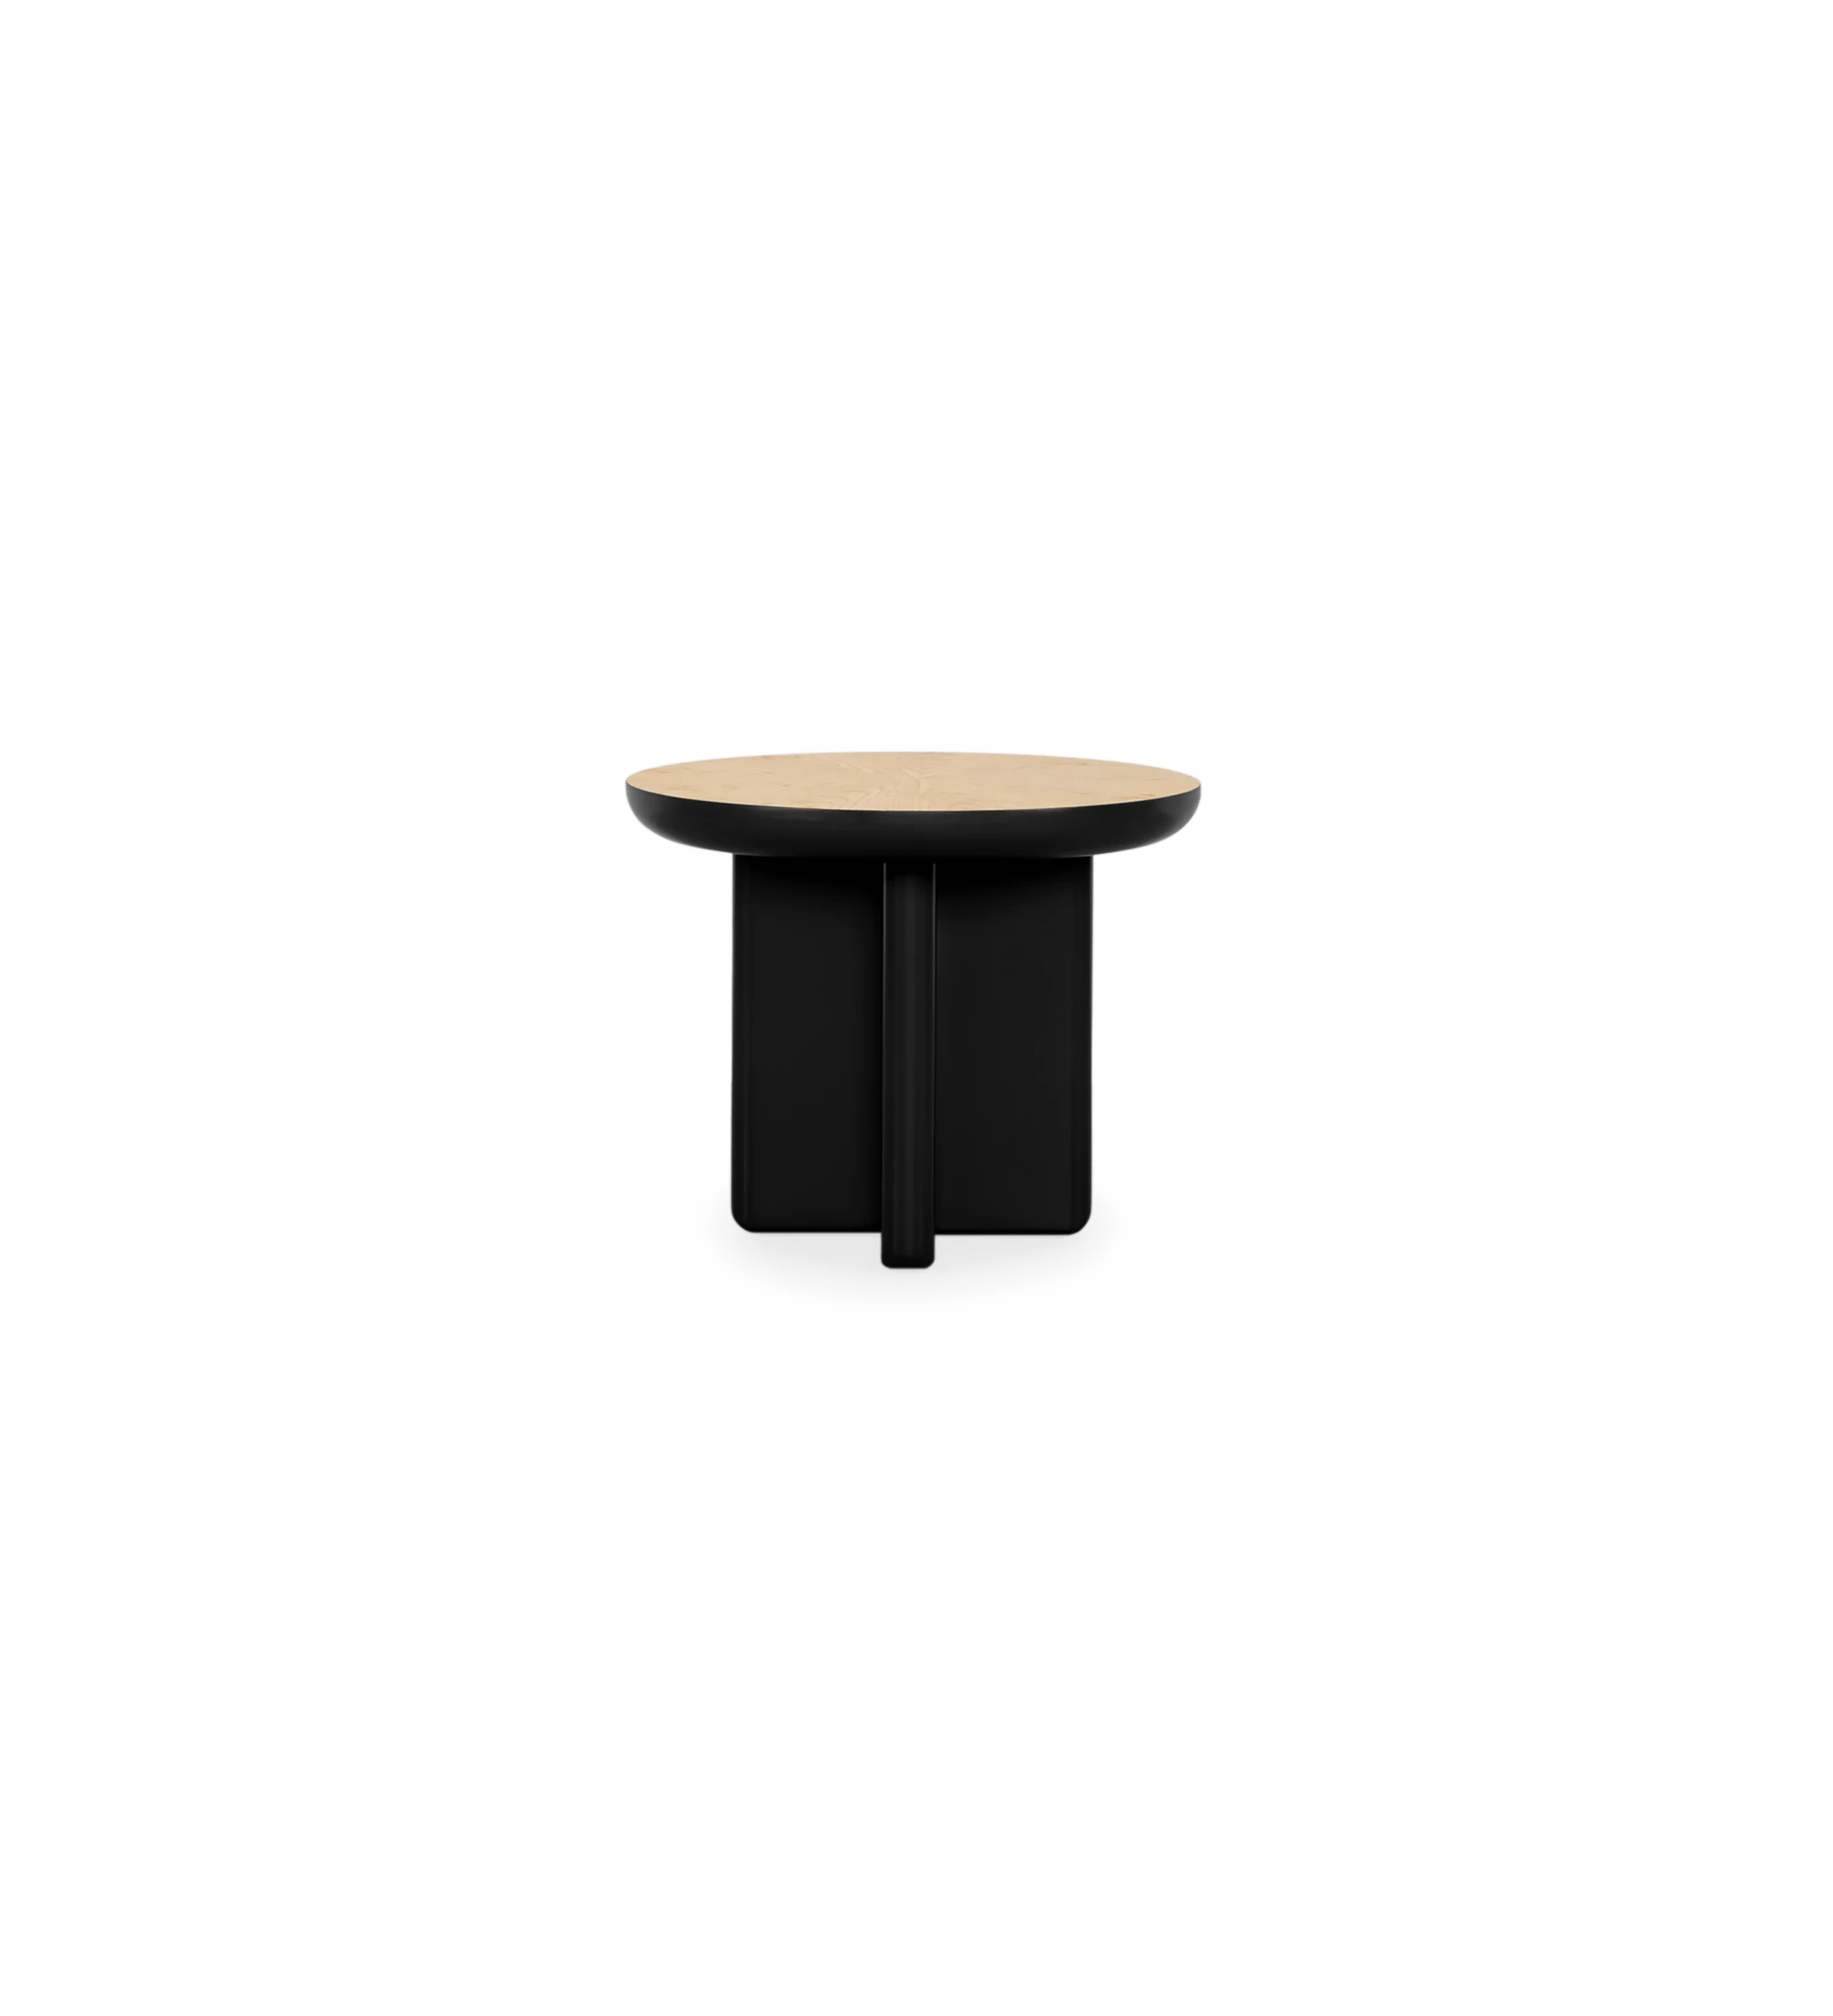 Mónaco round center table in black lacquer with natural oak veneer top, Ø 55 cm.